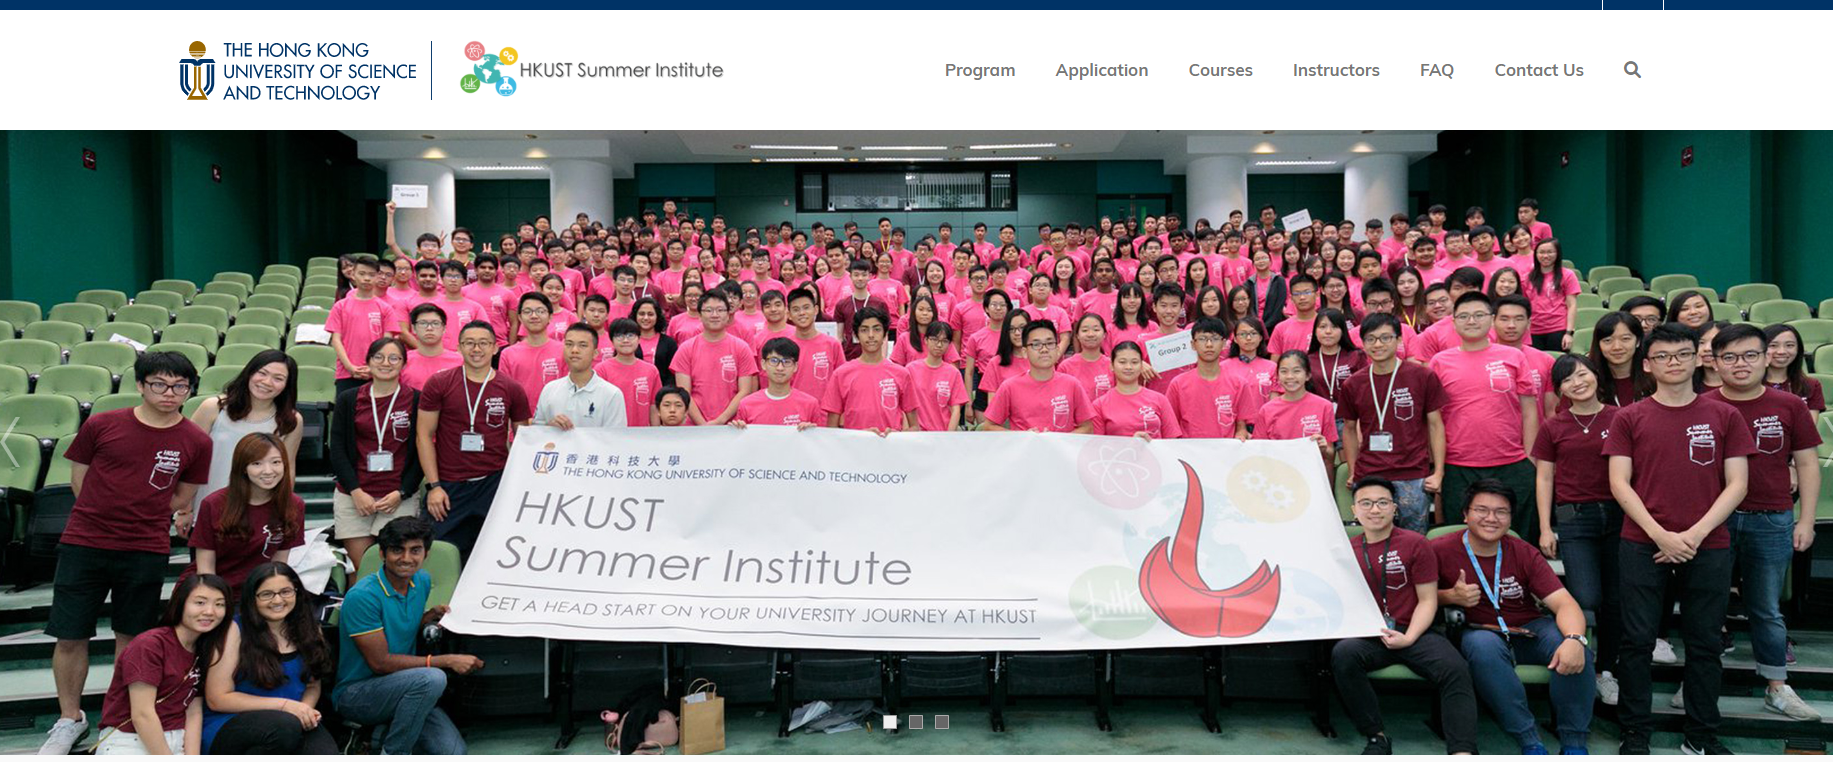 The Hong Kong University of Science and Technology Summer Institute